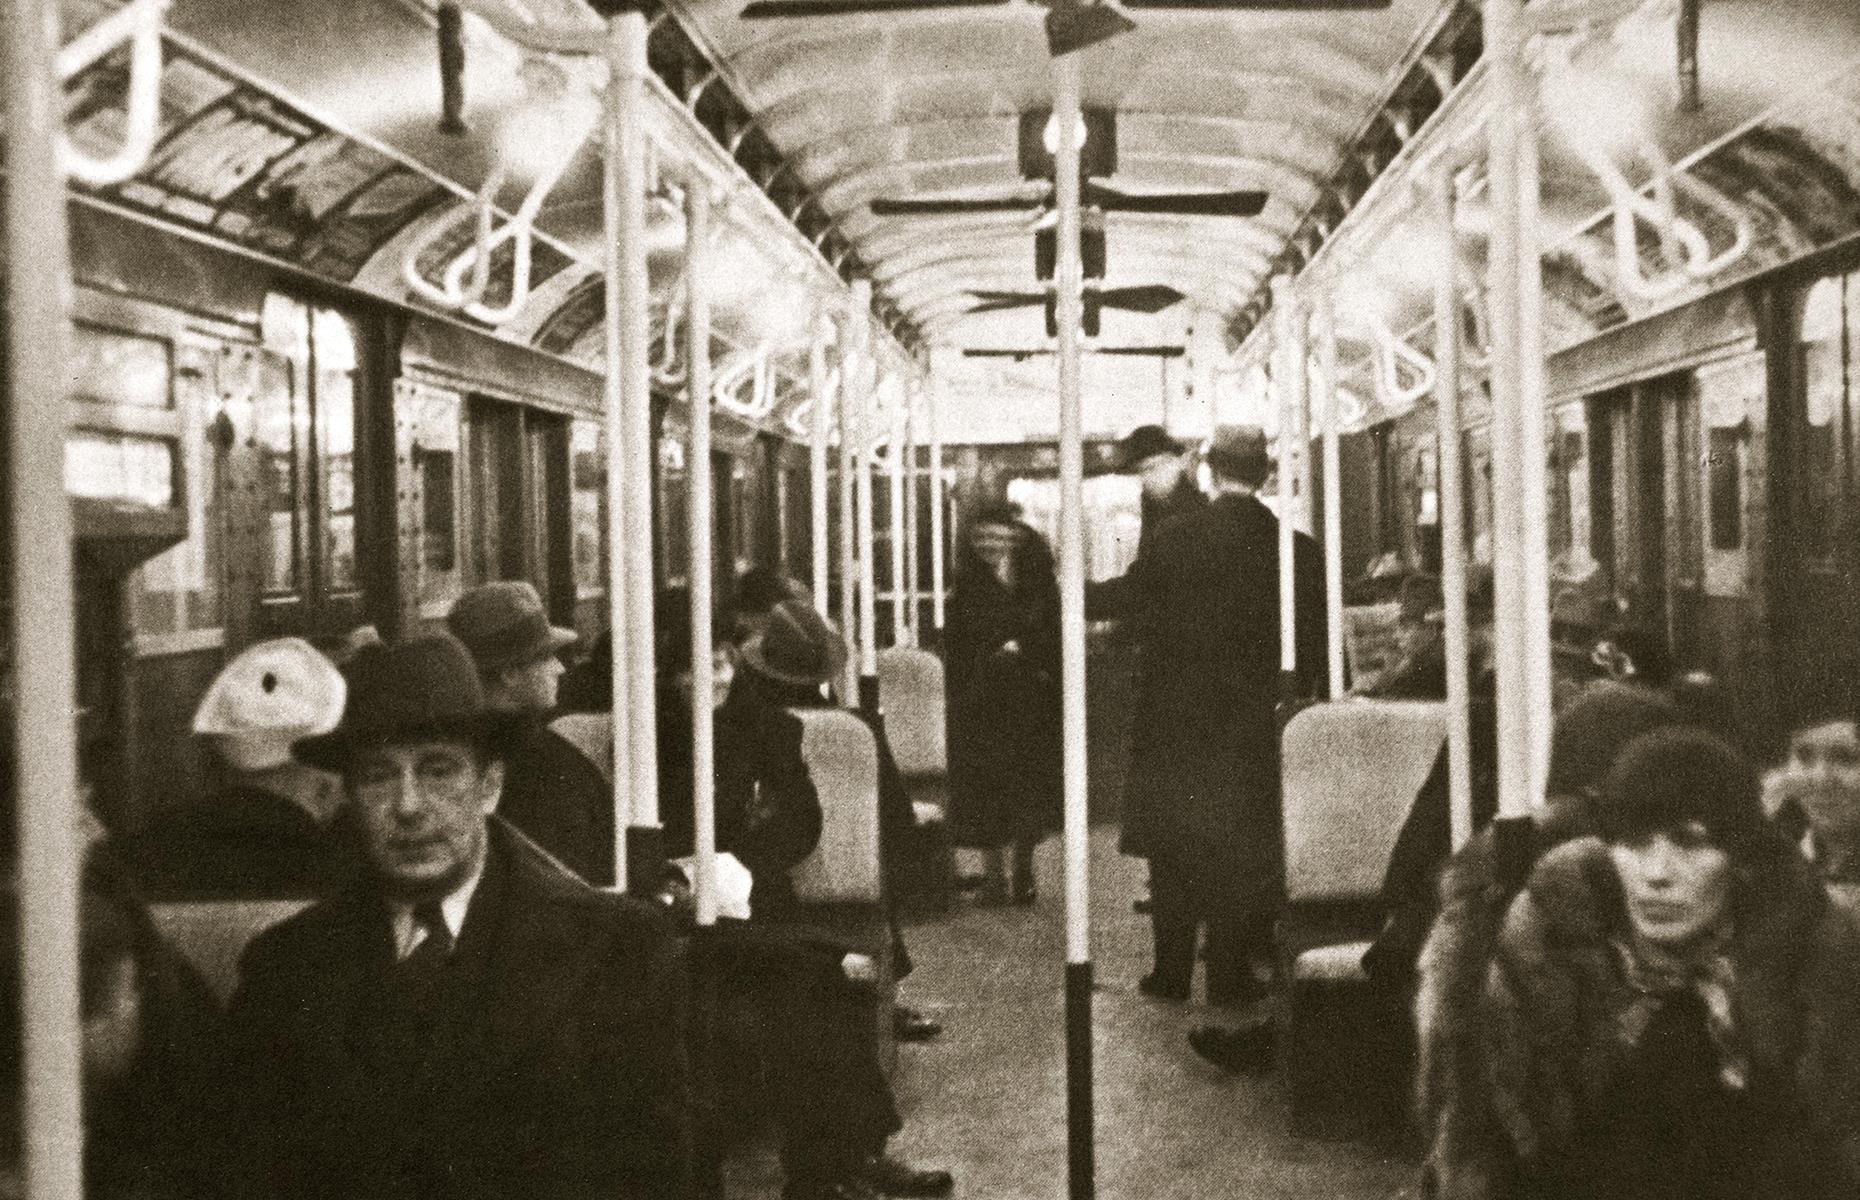 Meanwhile, the New York subway system continued to grow throughout the decades. Extra lines were built in the 1930s, including routes into Queens and the Bronx. This 1930s snap shows a full Eighth Avenue subway carriage – the Eighth Avenue Line opened in 1932 and still runs today.